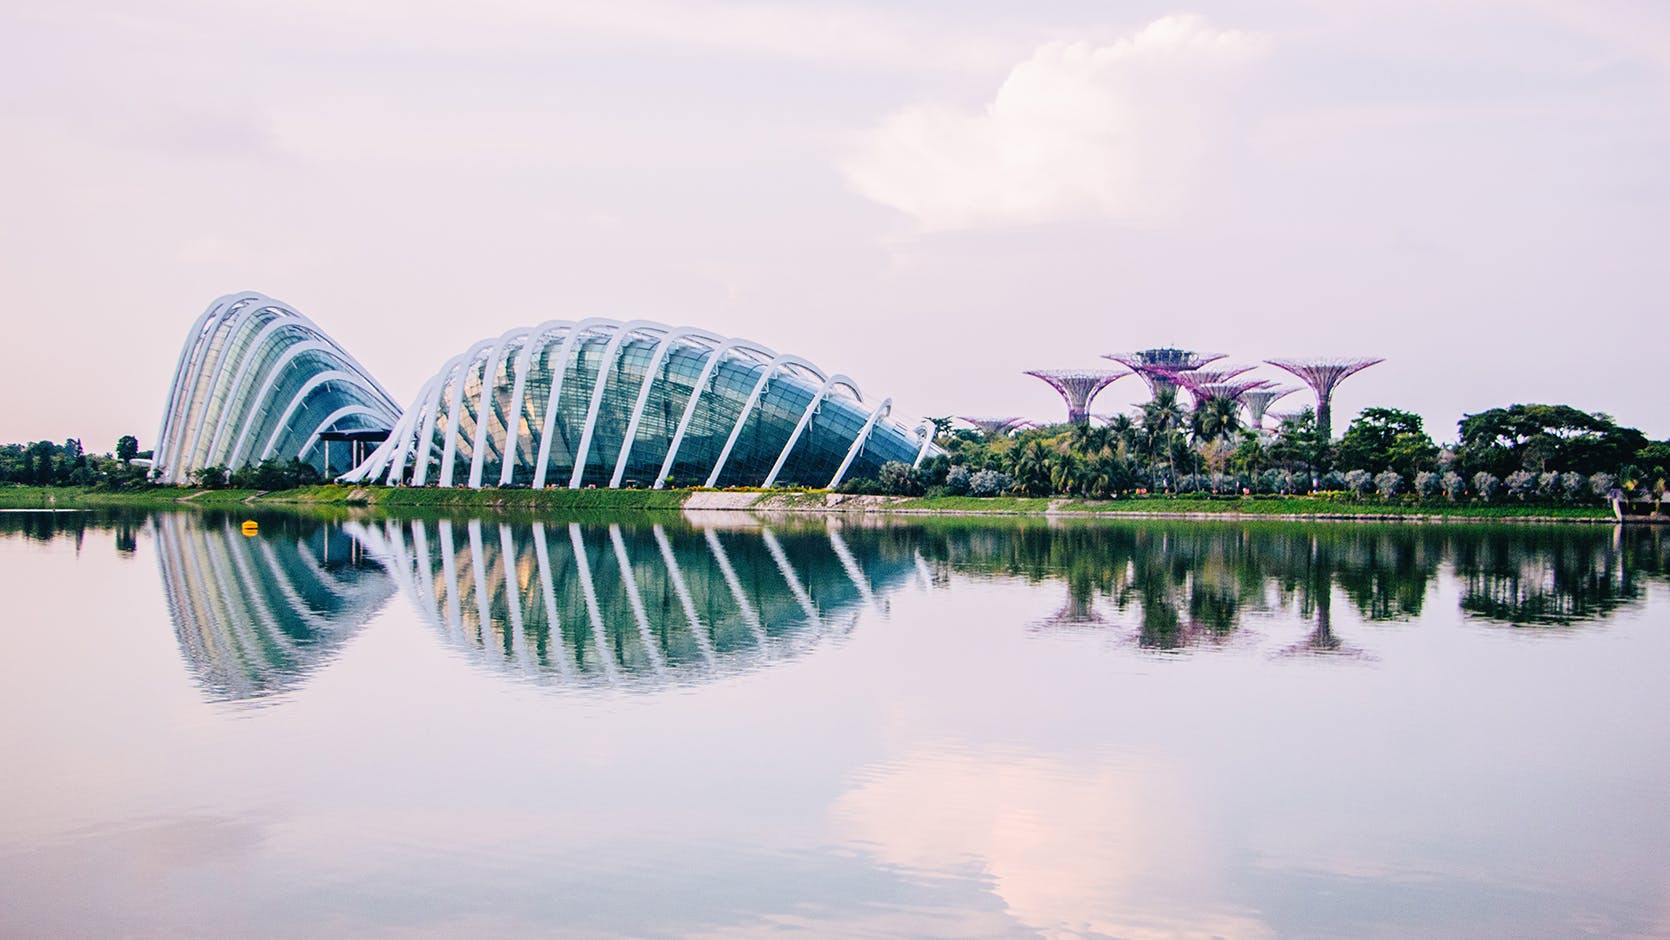 Cloud Forest and Flower Dome at Gardens By The Bay entrance tickets